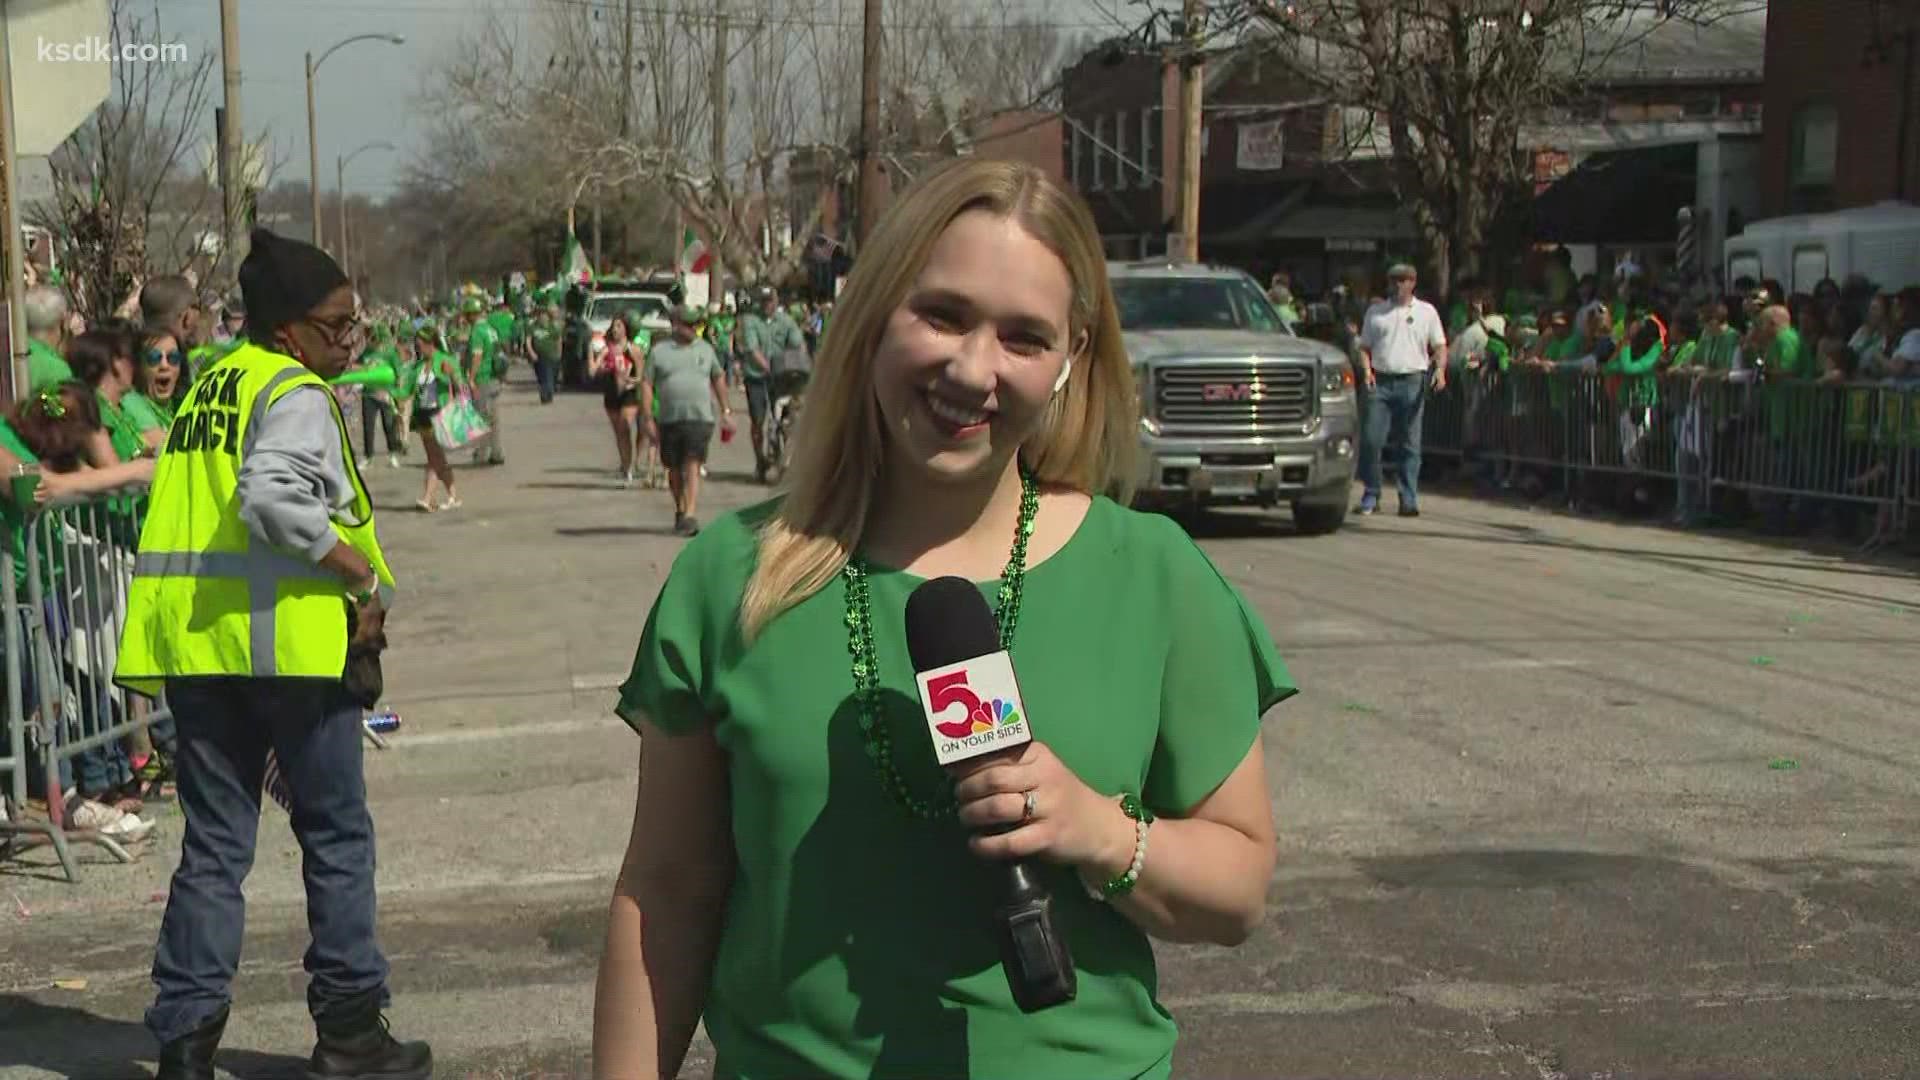 After a two years without the full slate of St. Patrick’s Day festivities, Dogtown neighbors and businesses are ready for March 17.